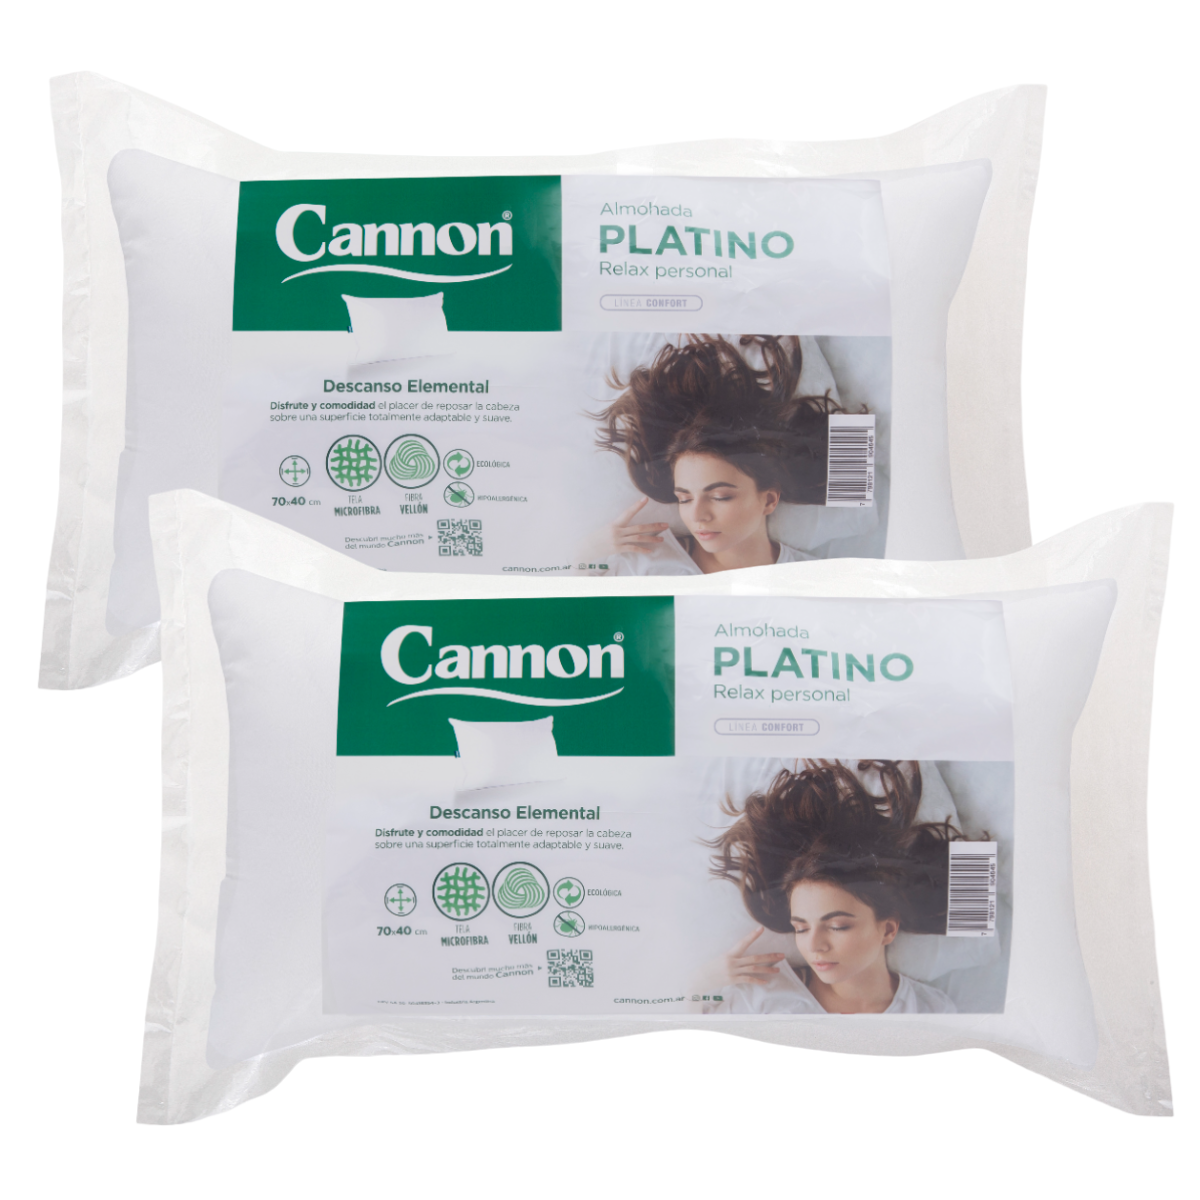 Almohada Cannon Exclusive 70 x 40 Pack X 2 – Tu Mejor Sommier